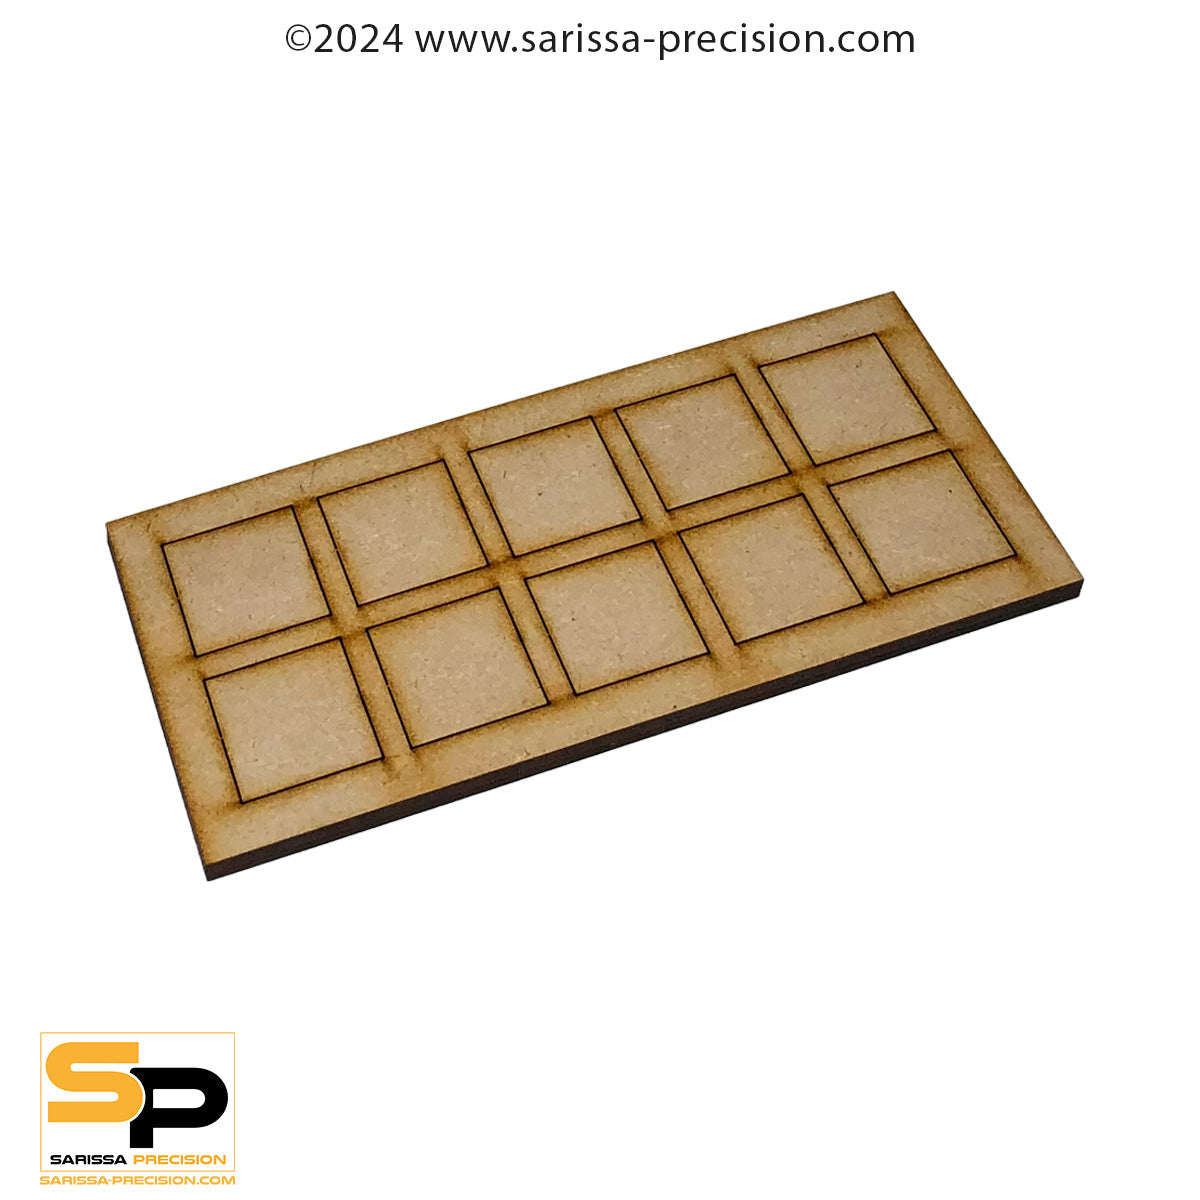 15x1 30x30mm Conversion Tray for 25x25mm bases